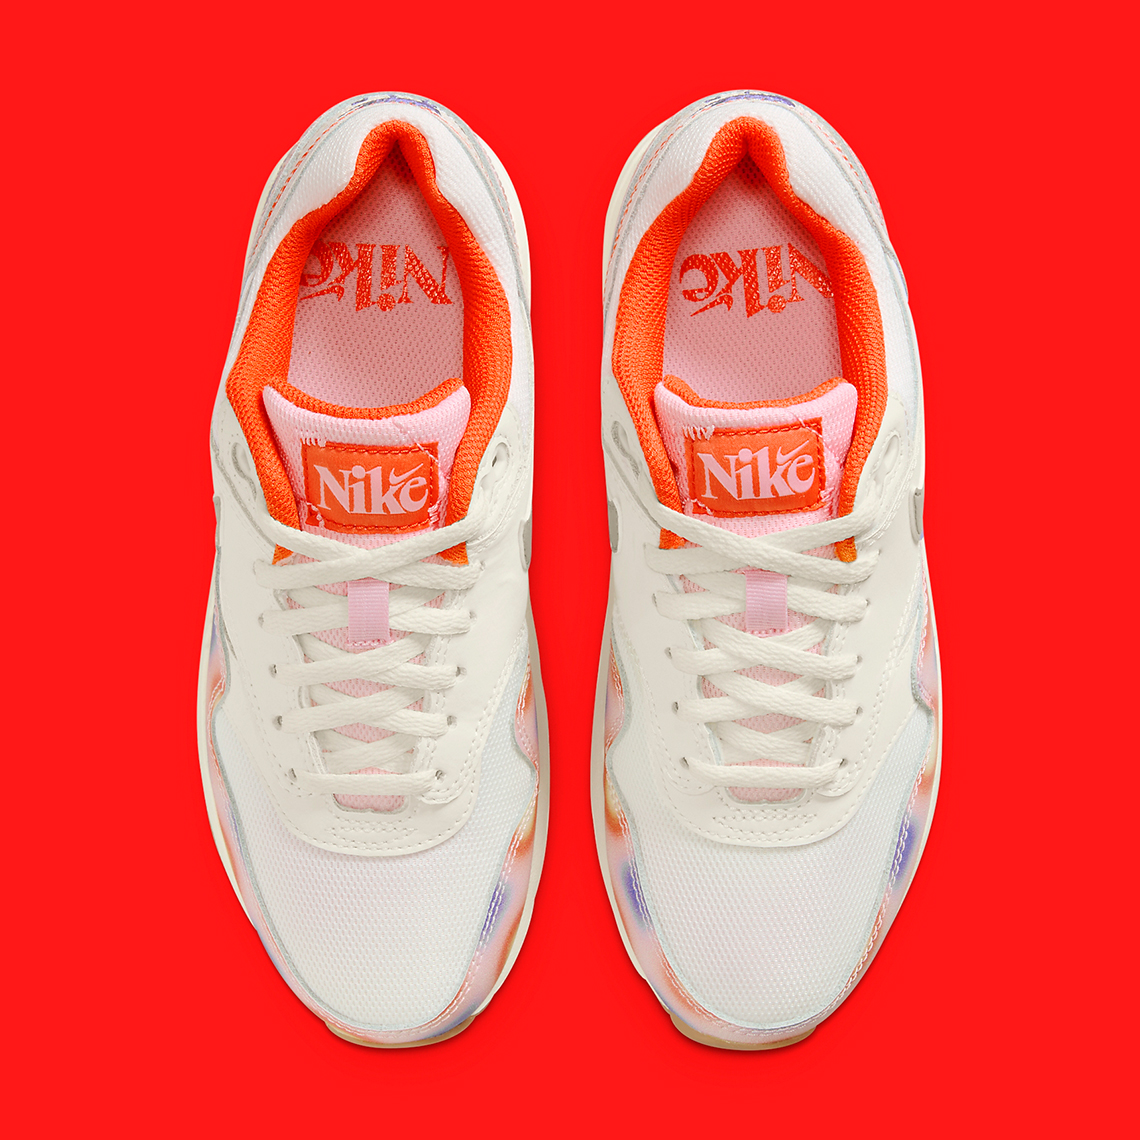 nike ceremony Air Max 1 ps everything you need FN7287 100 4